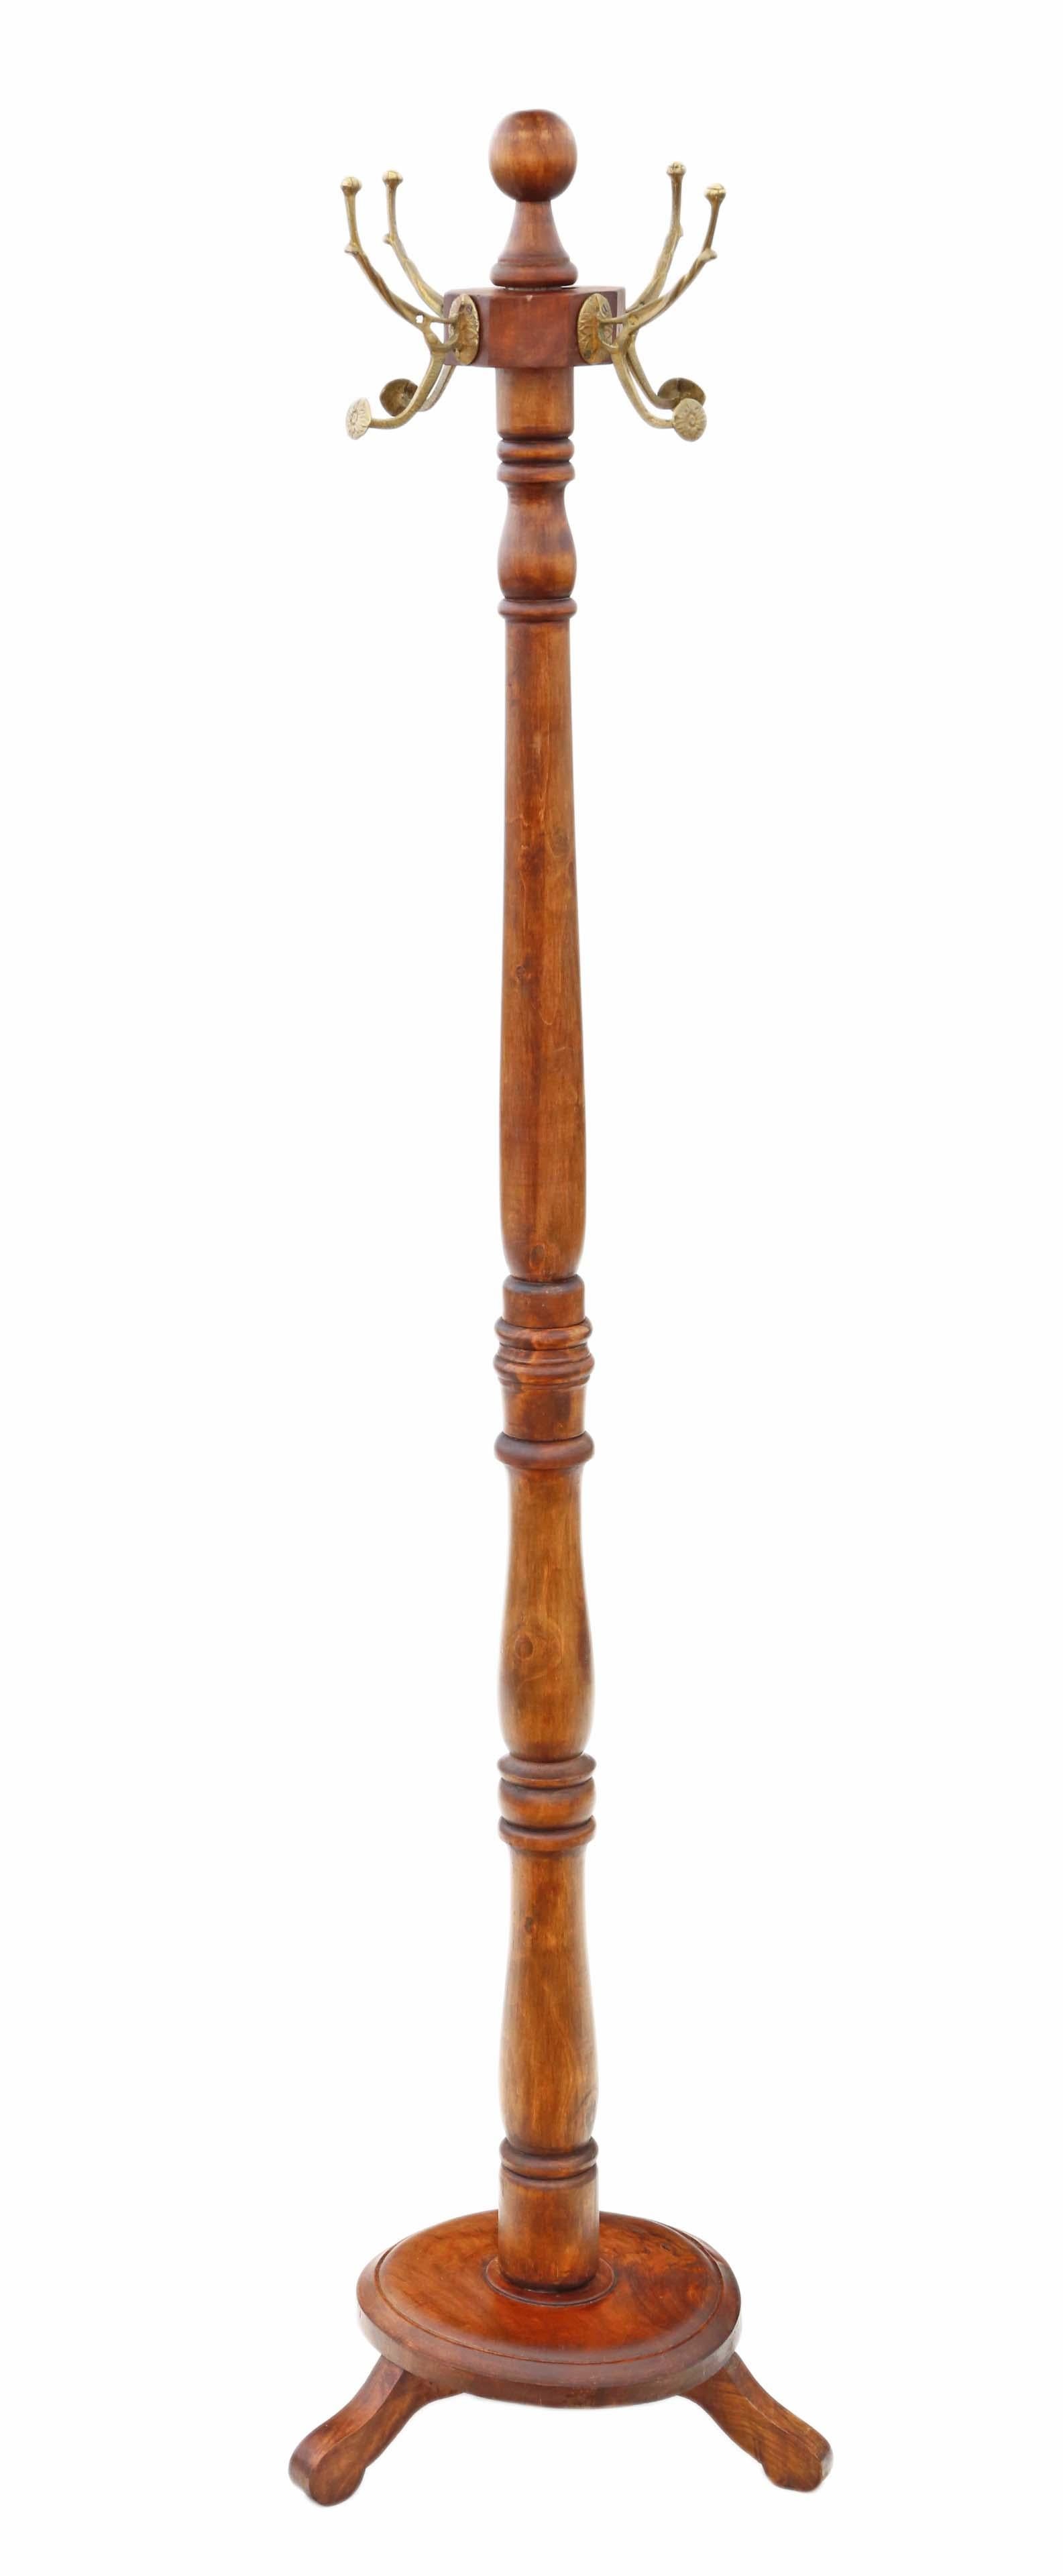 Antique quality Victorian beech and walnut coat, hat, stick, umbrella stand circa 1870
solid and heavy, with no loose joints. Classical 19th century styling with ormolu brass hooks. A rare find.
Rotating top and unscrews at the centre for